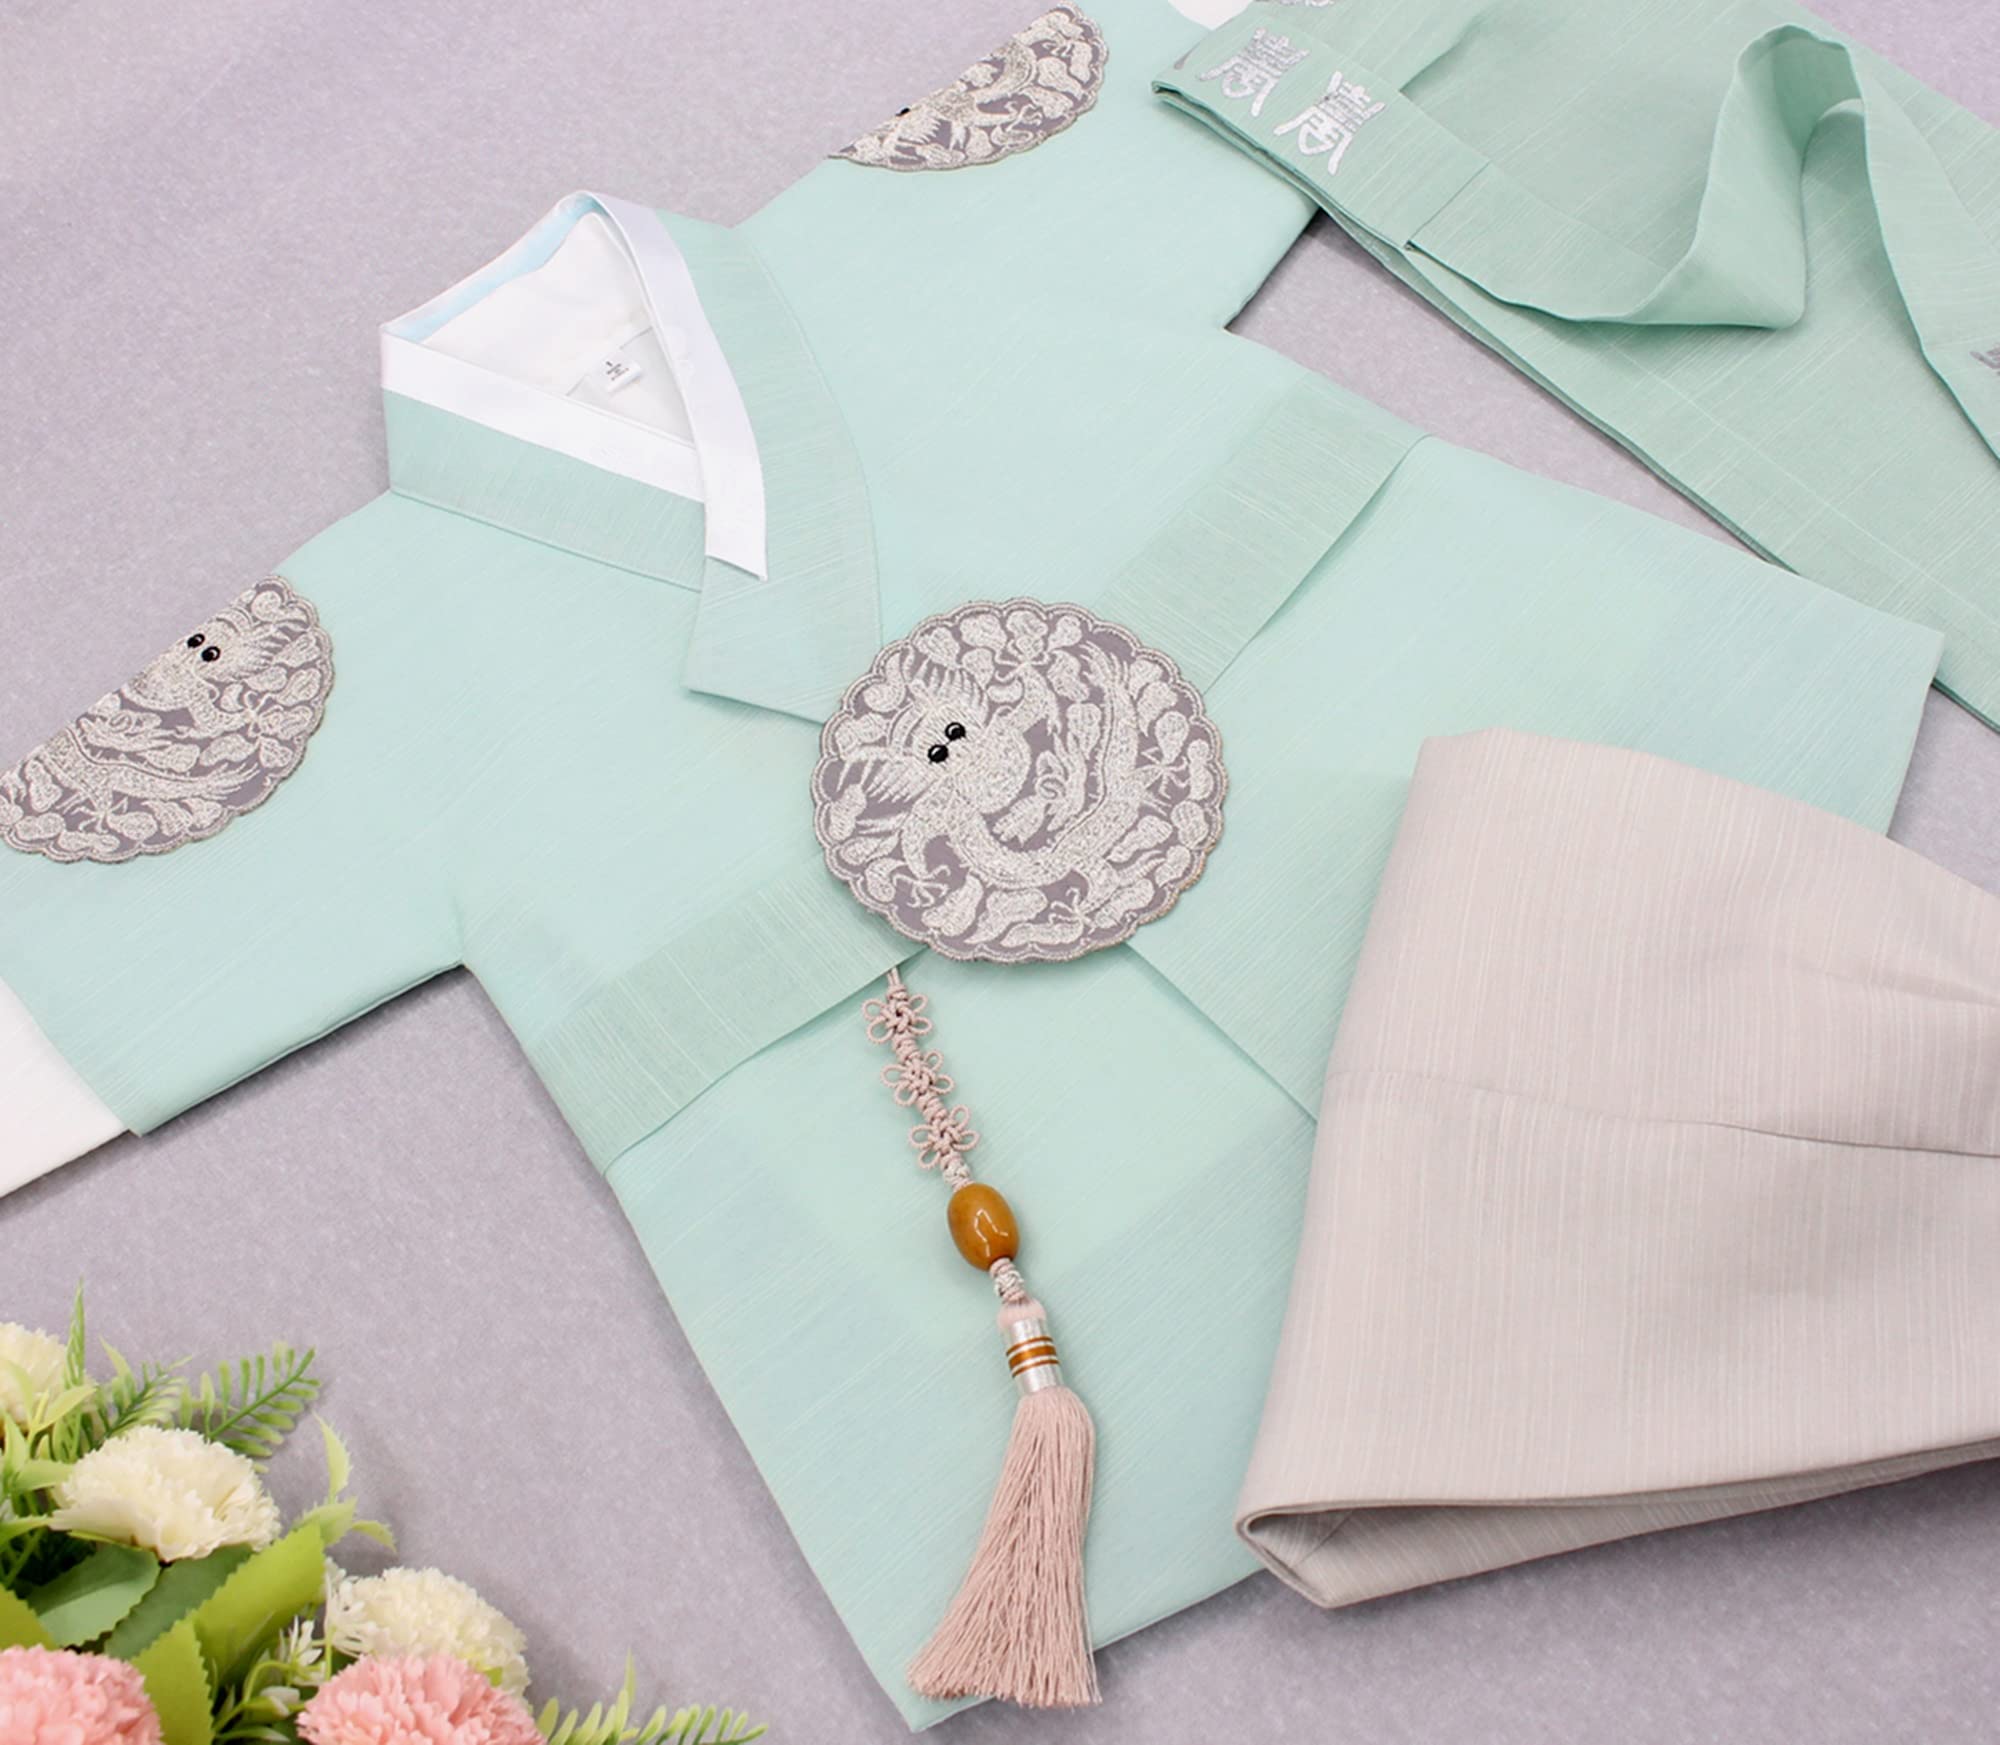 Korean Hanbok Boy Baby Traditional Kings Design Clothing Set Mint 100th days to 8 ages ddb002